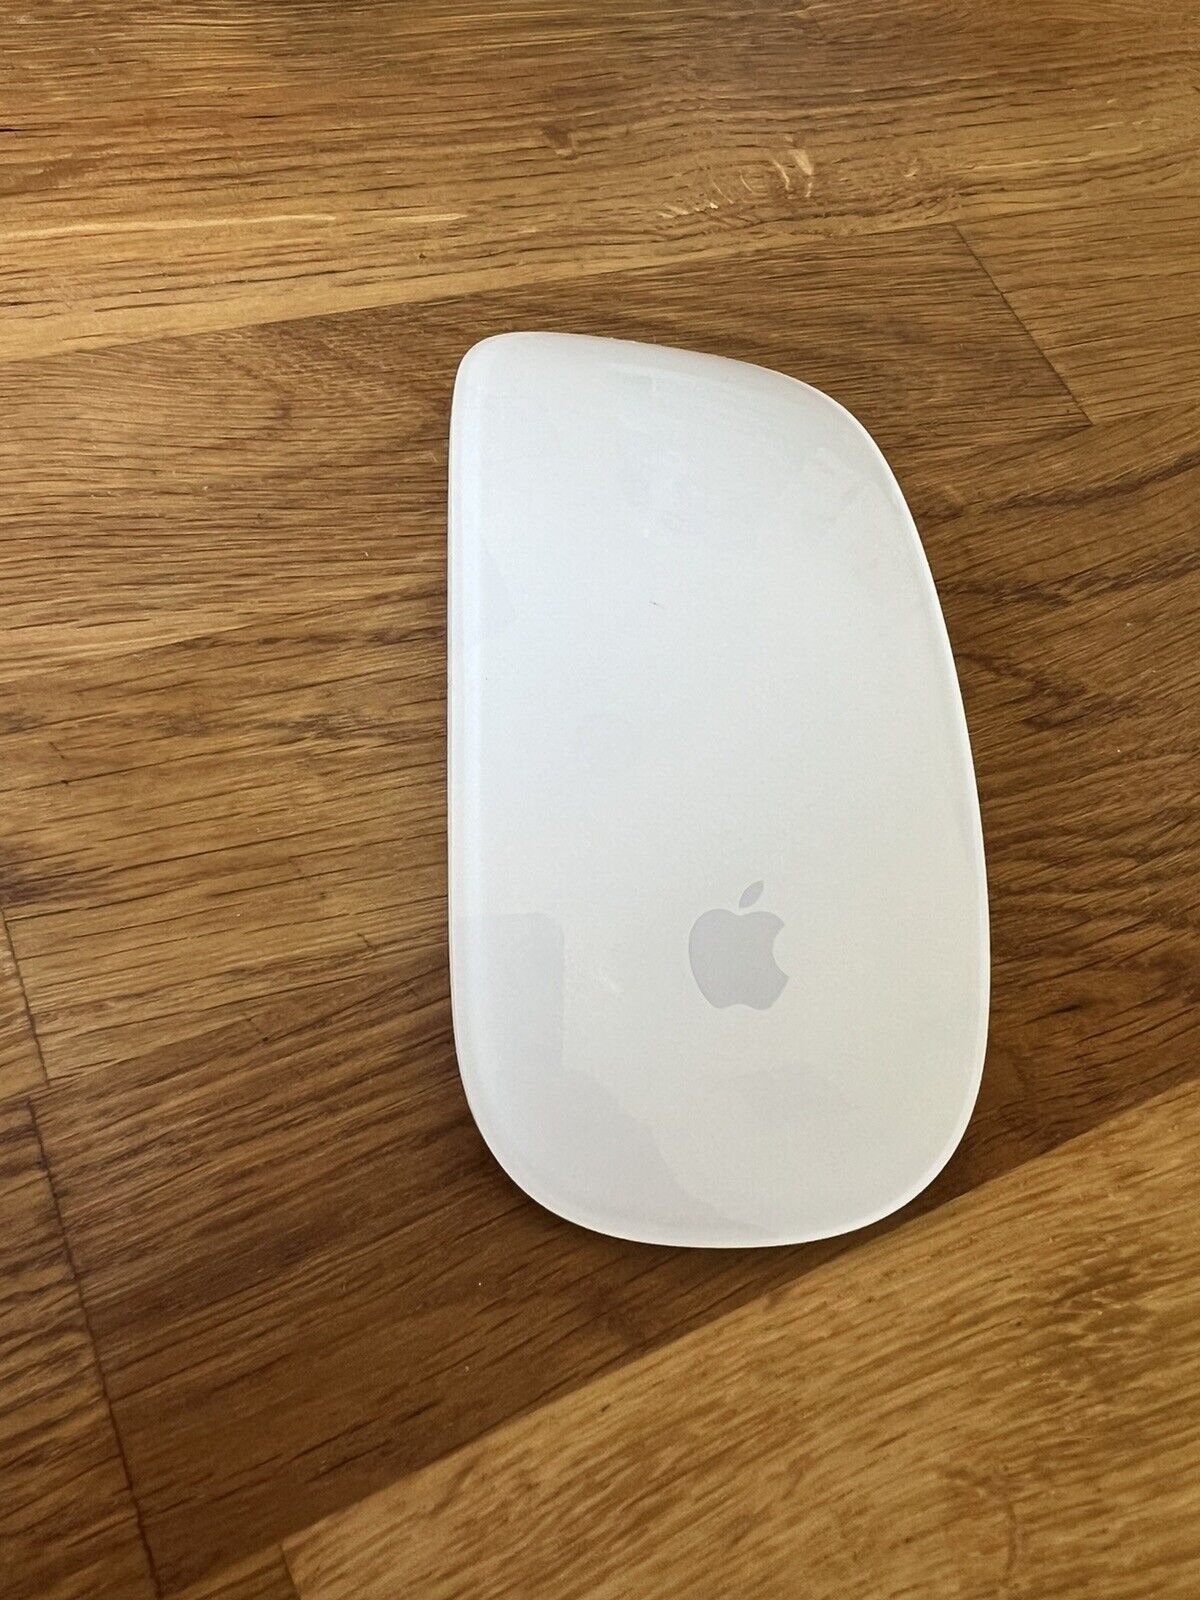 Apple Wireless Magic Mouse * Model A1296 3vdc * New batteries * 